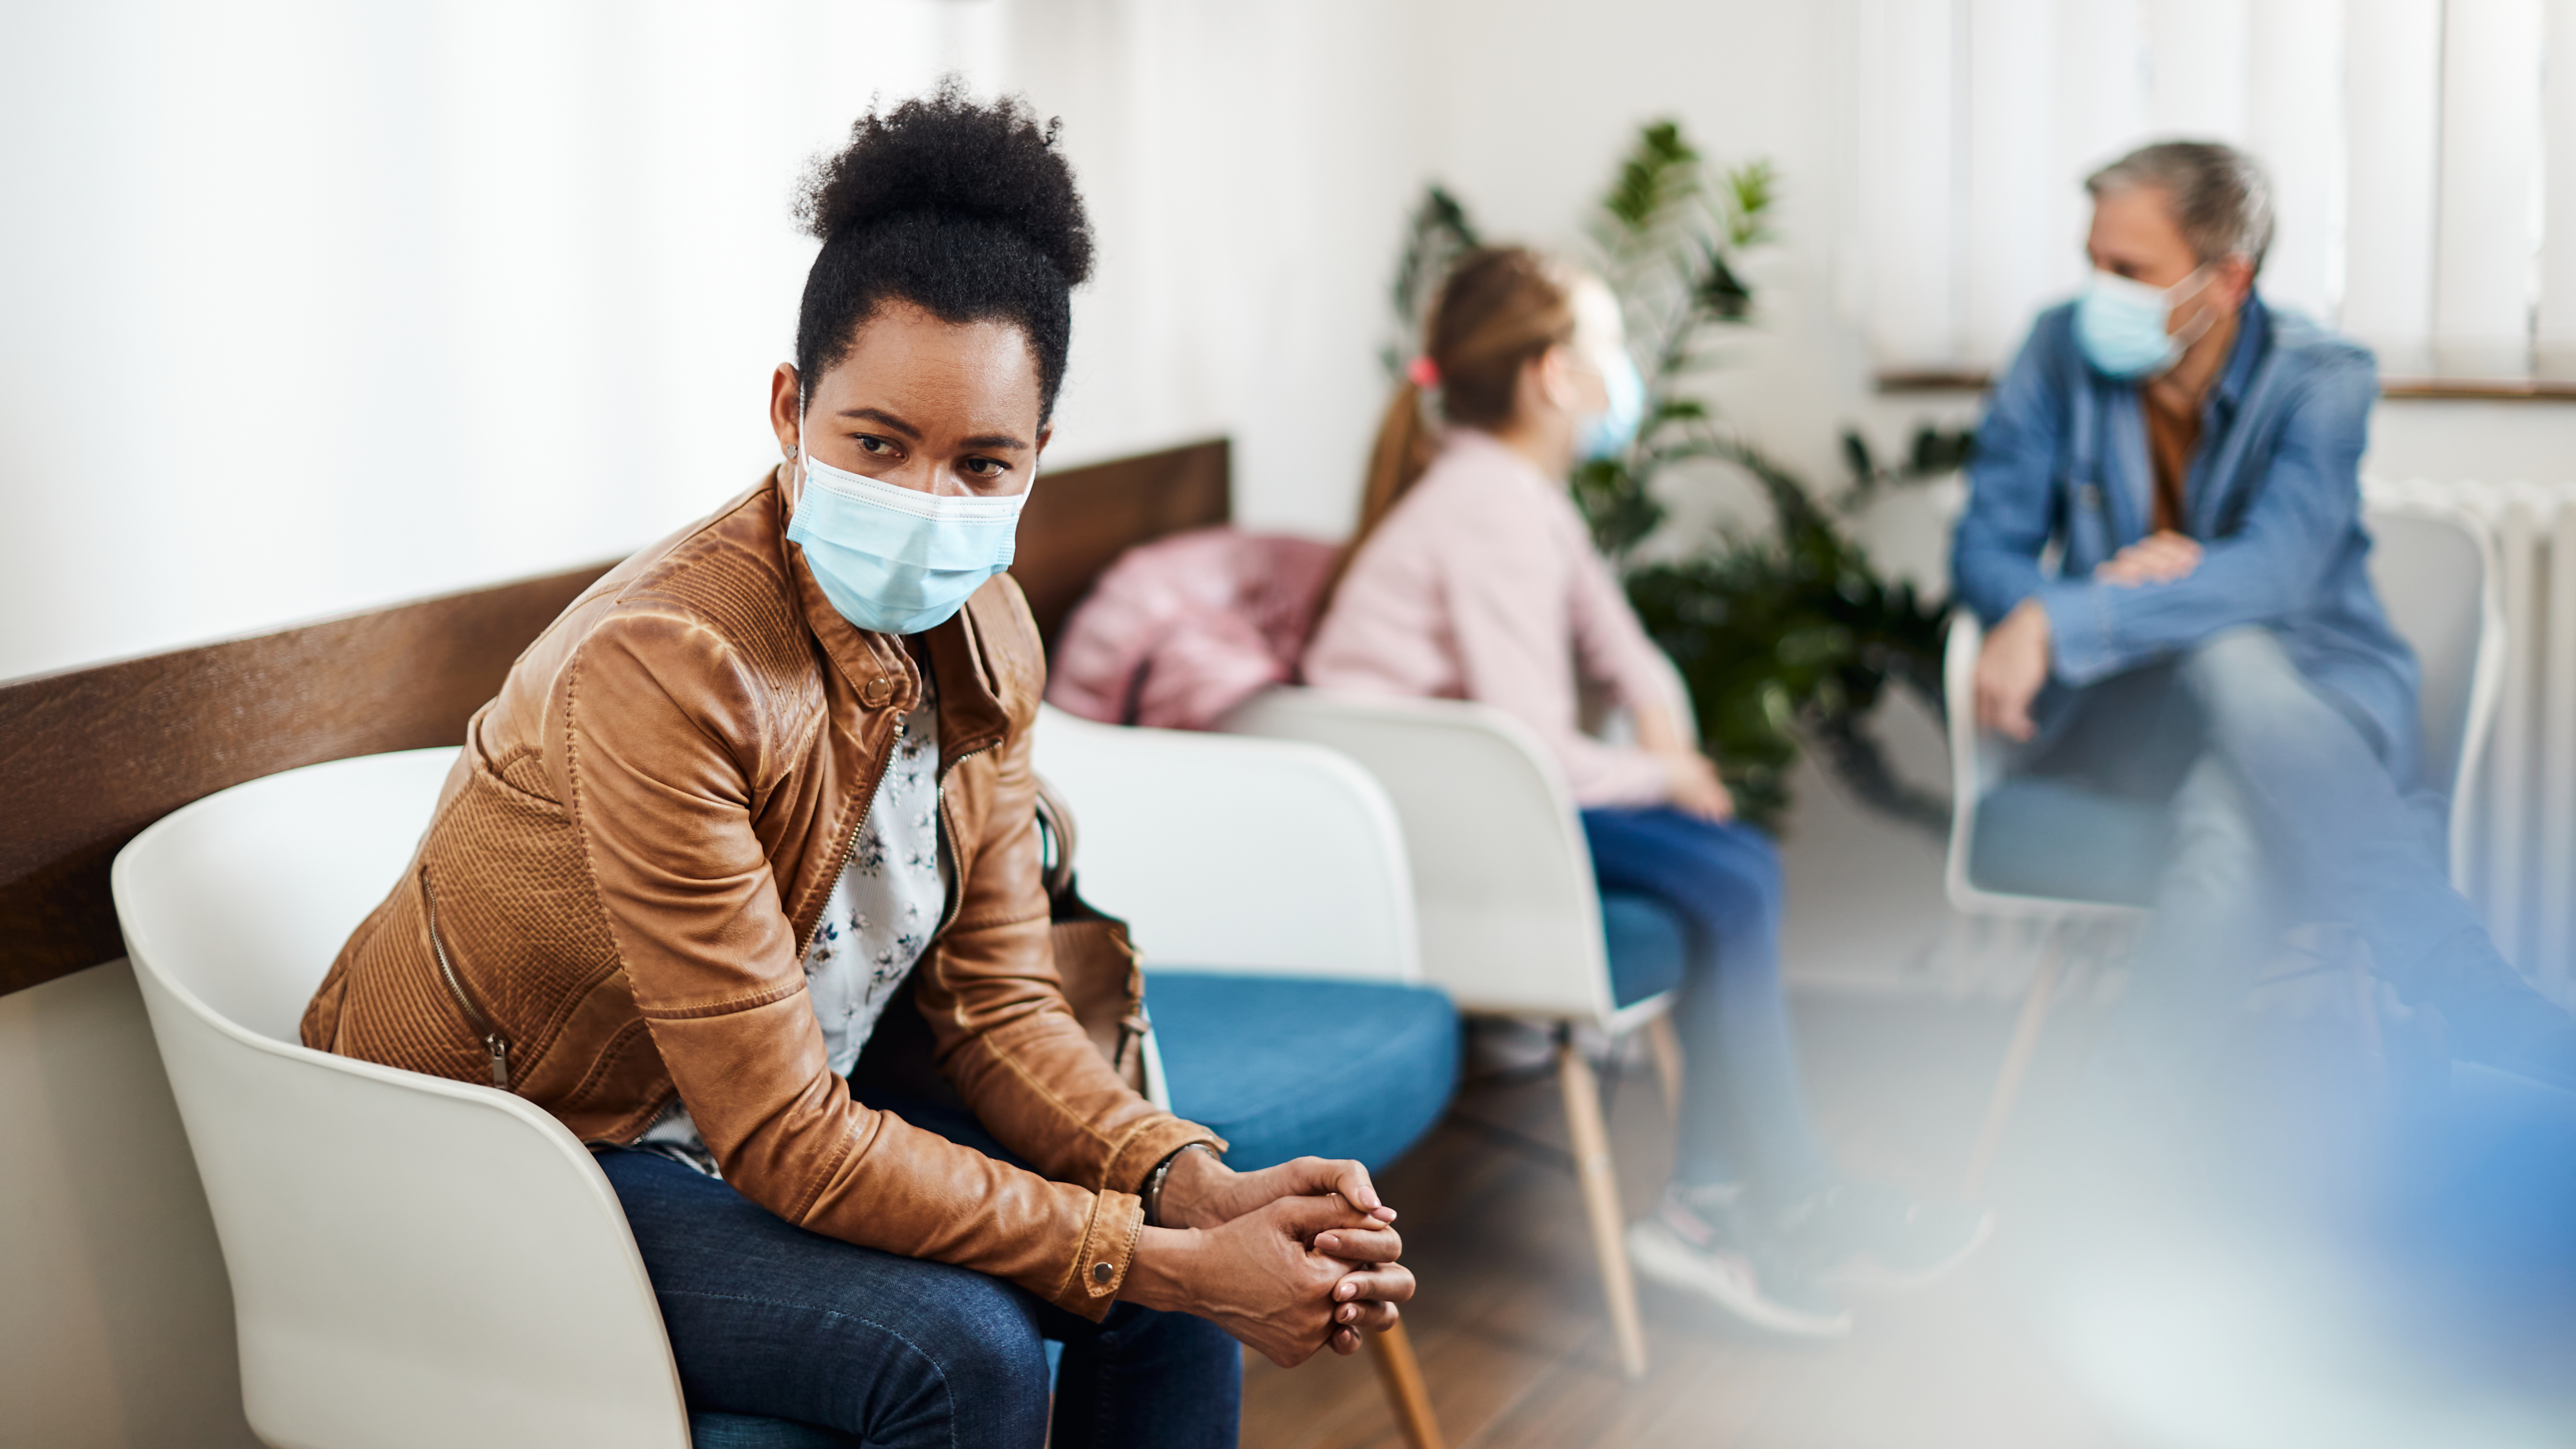 Pensive African American woman wearing protective face mask while waiting for dental appointment at dentist's office.